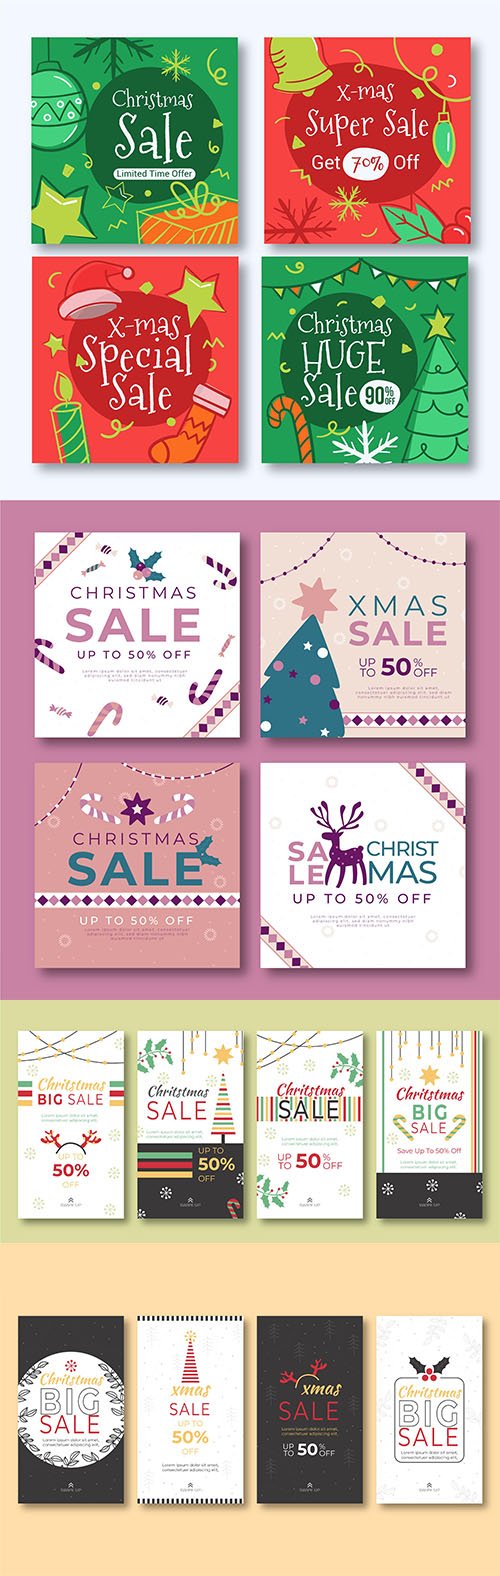 Christmas sale instagram post and stories collection